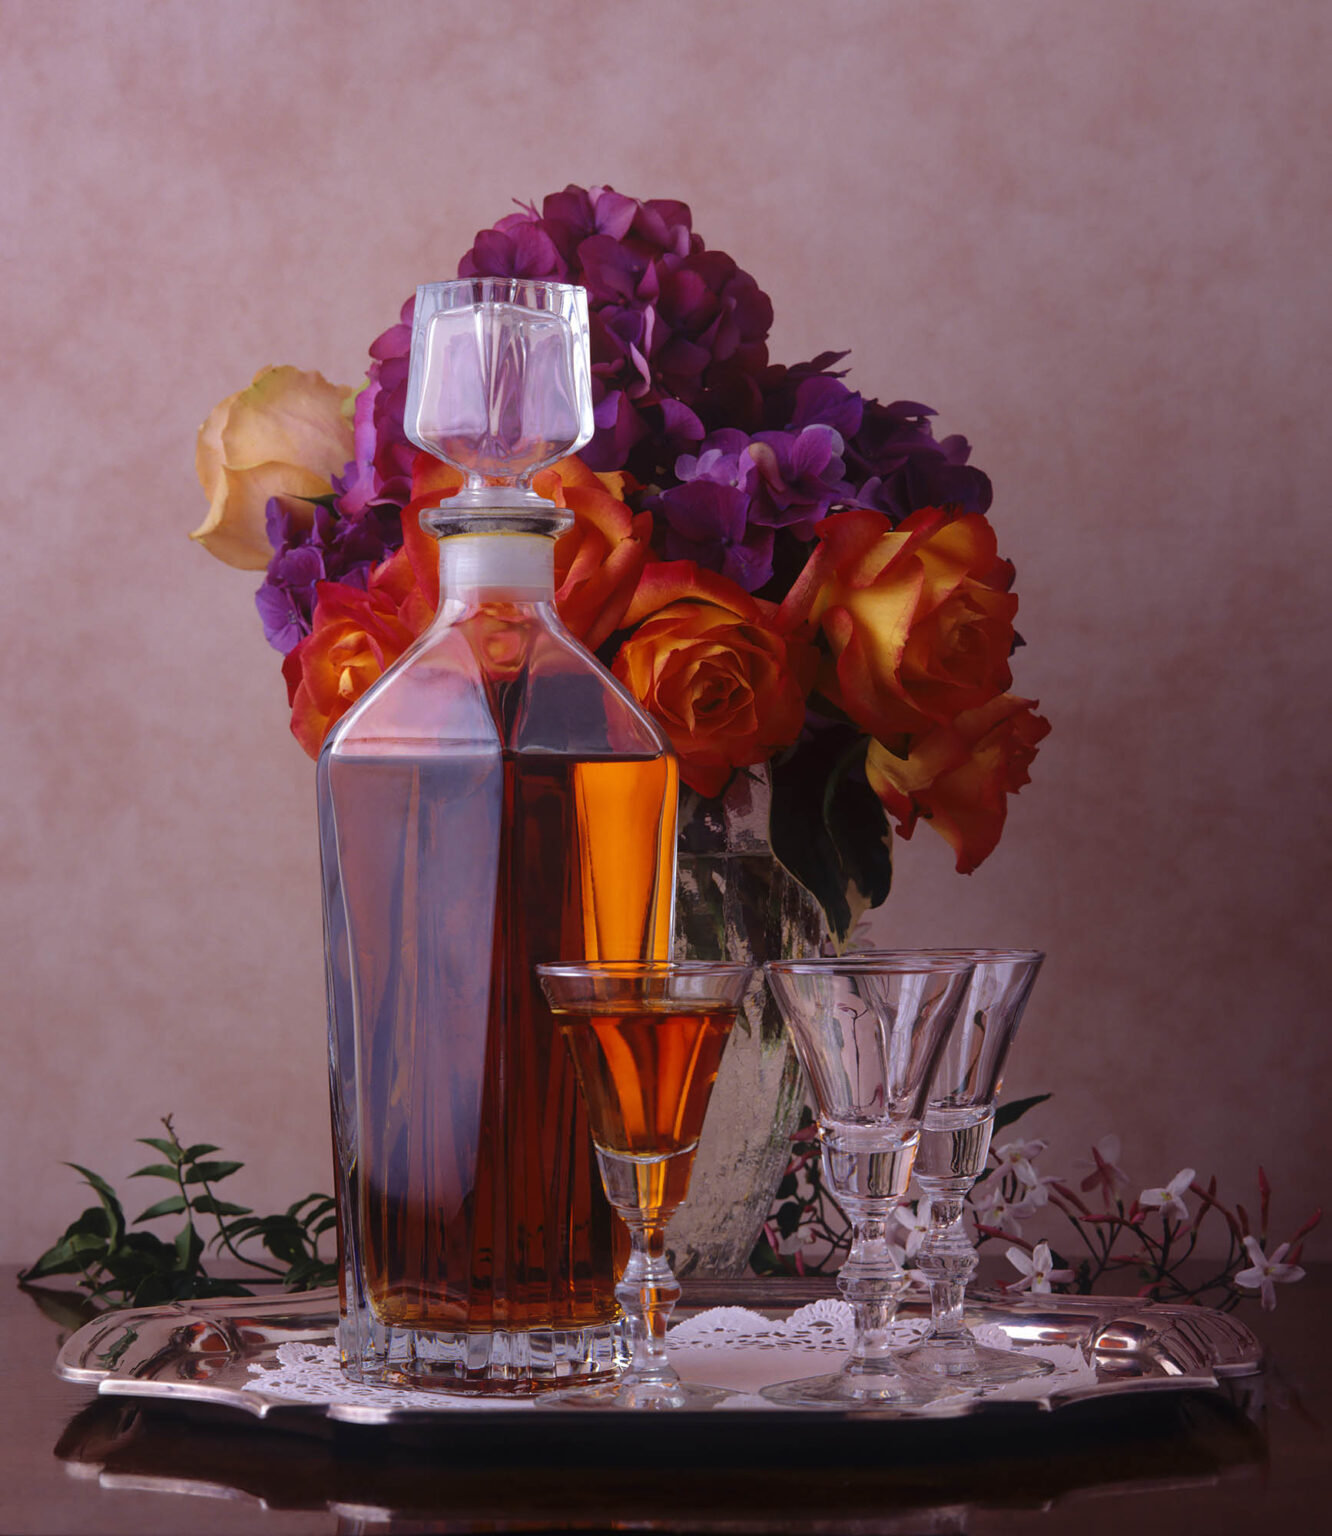 A GLASS DECANTER full of BRANDY with CRYSTAL GLASSES